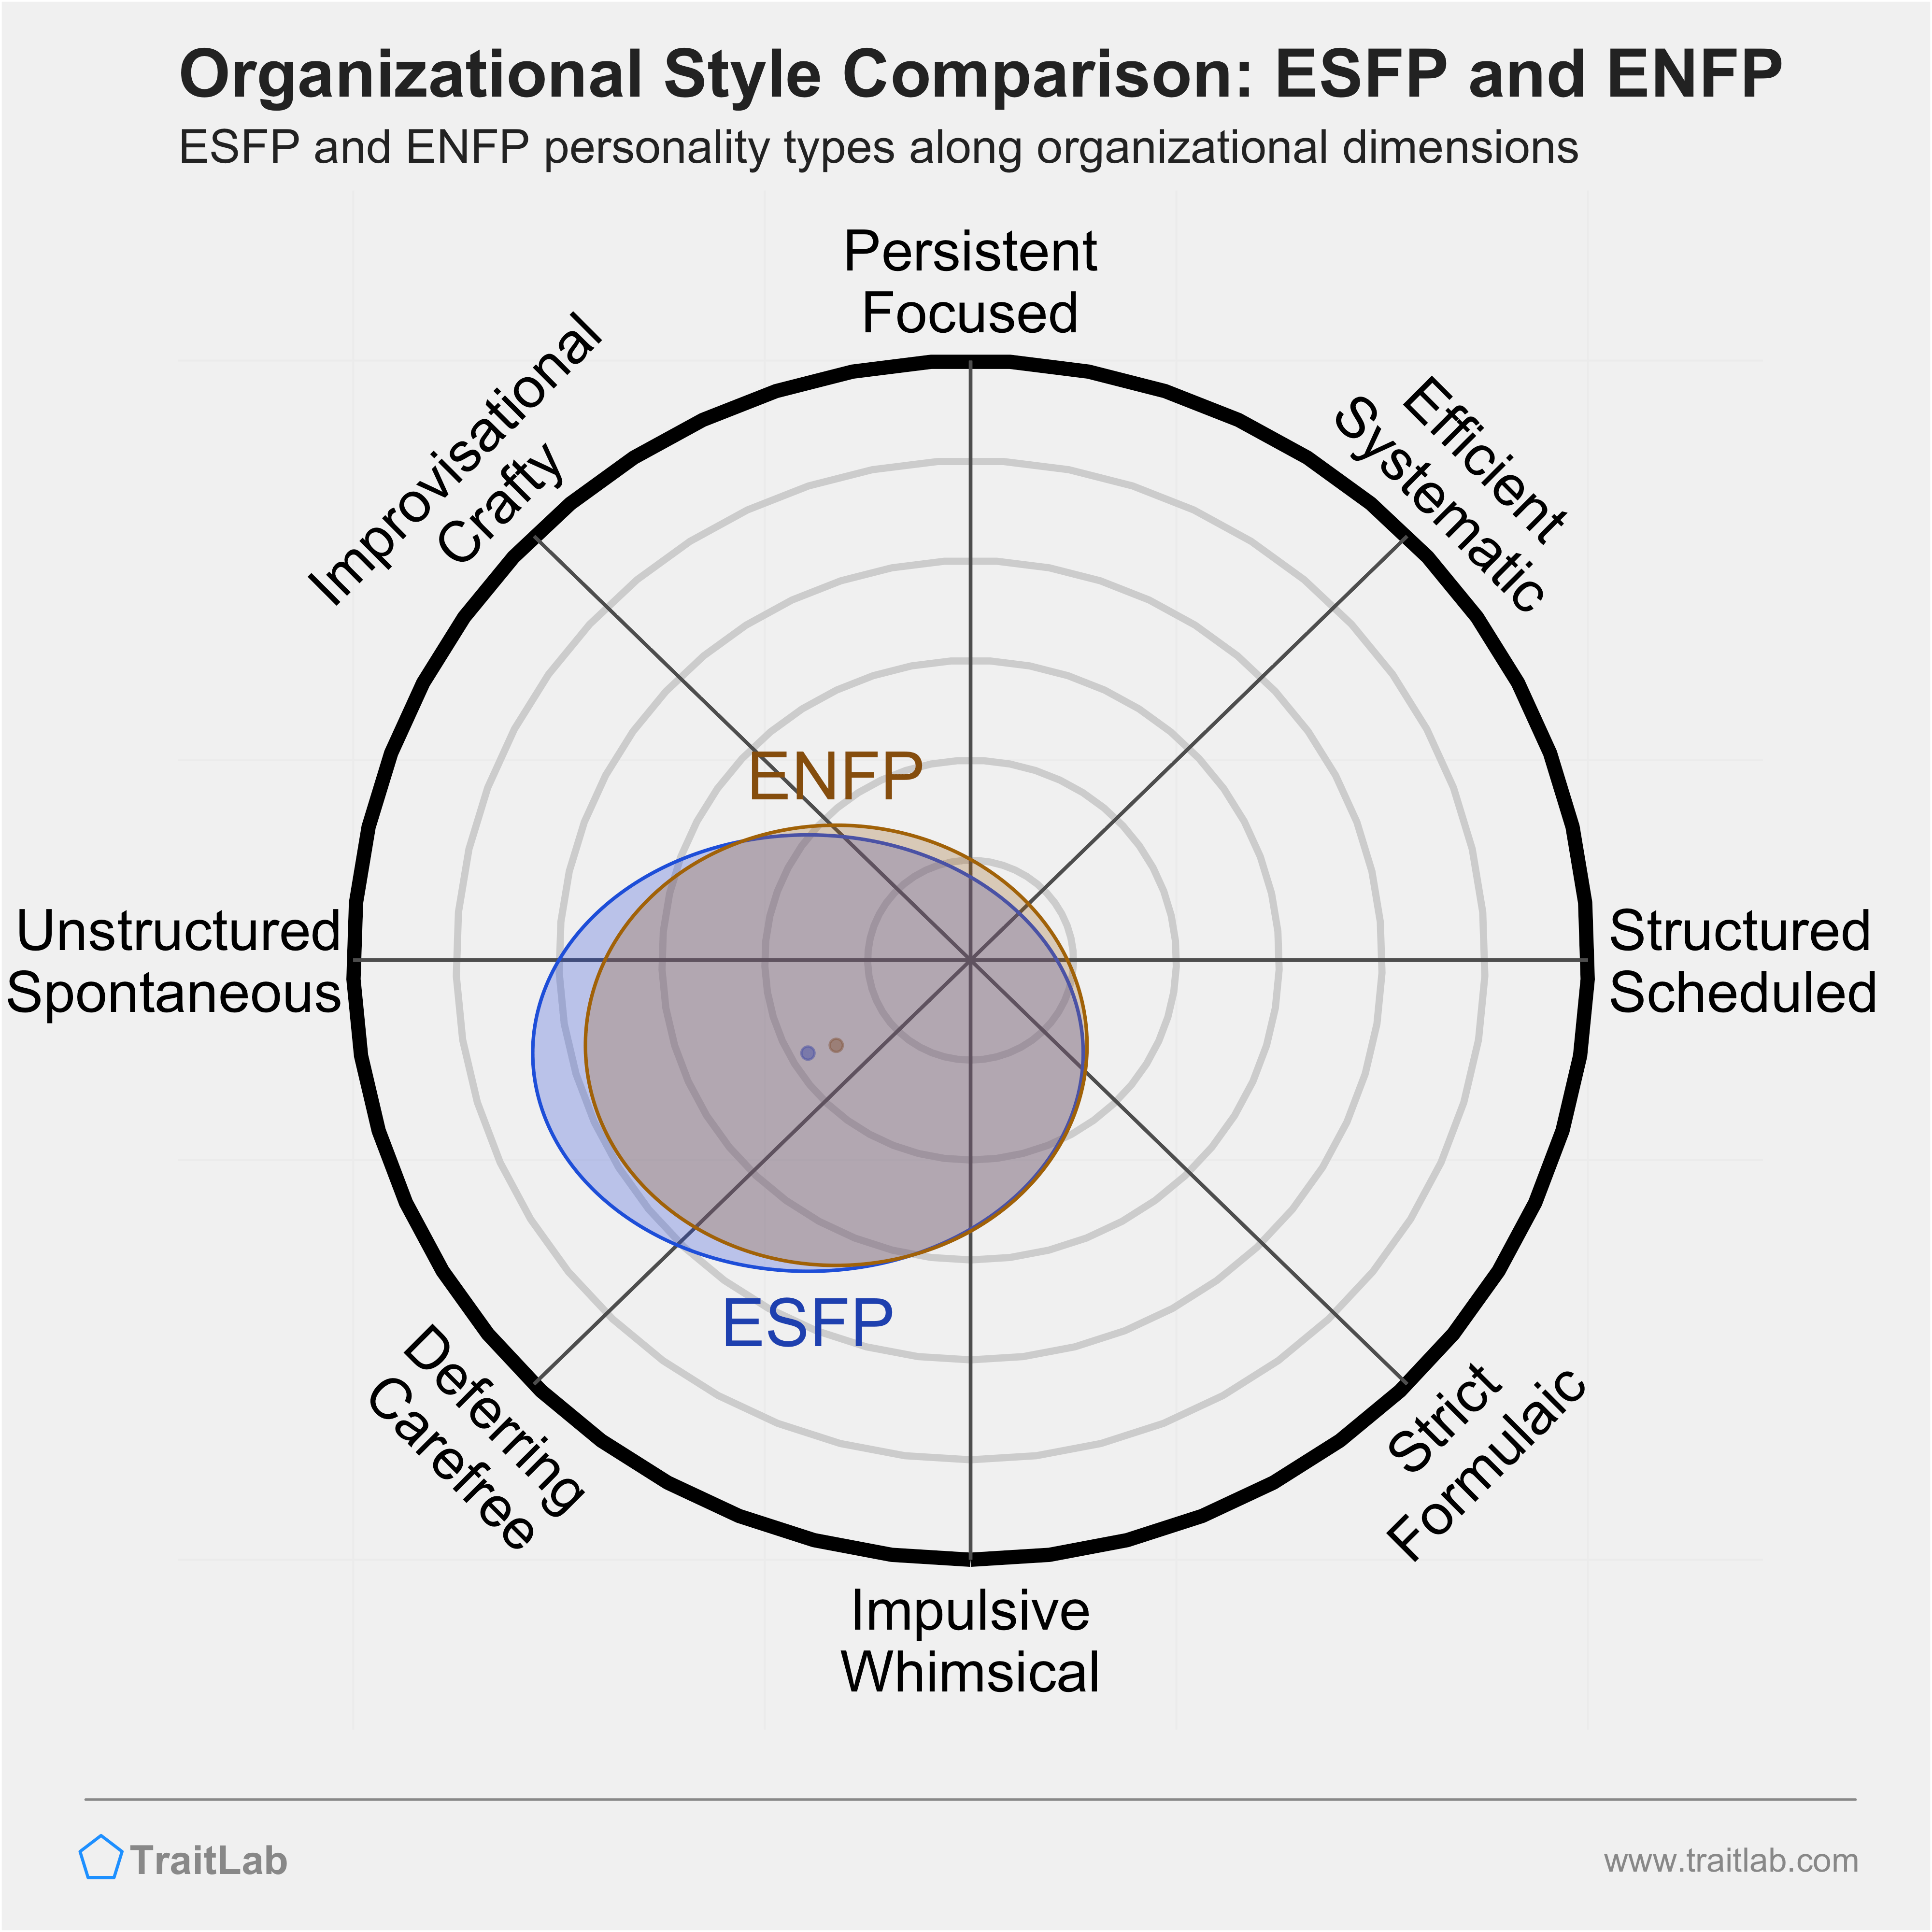 ESFP and ENFP comparison across organizational dimensions